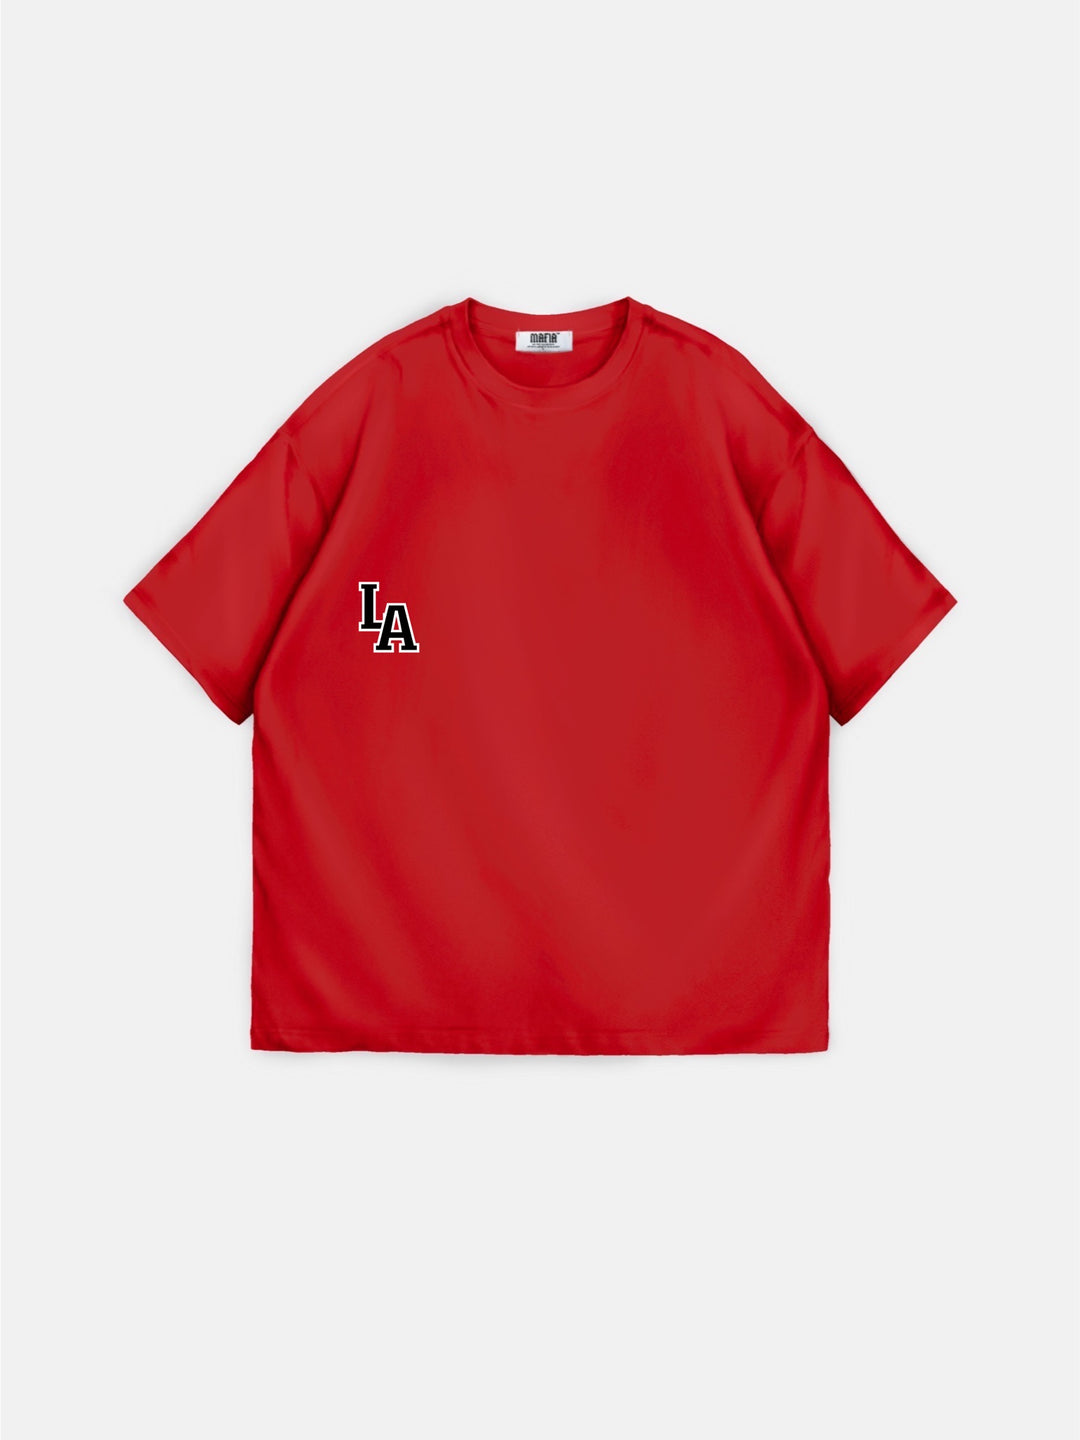 Oversize L.A T-shirt - Red